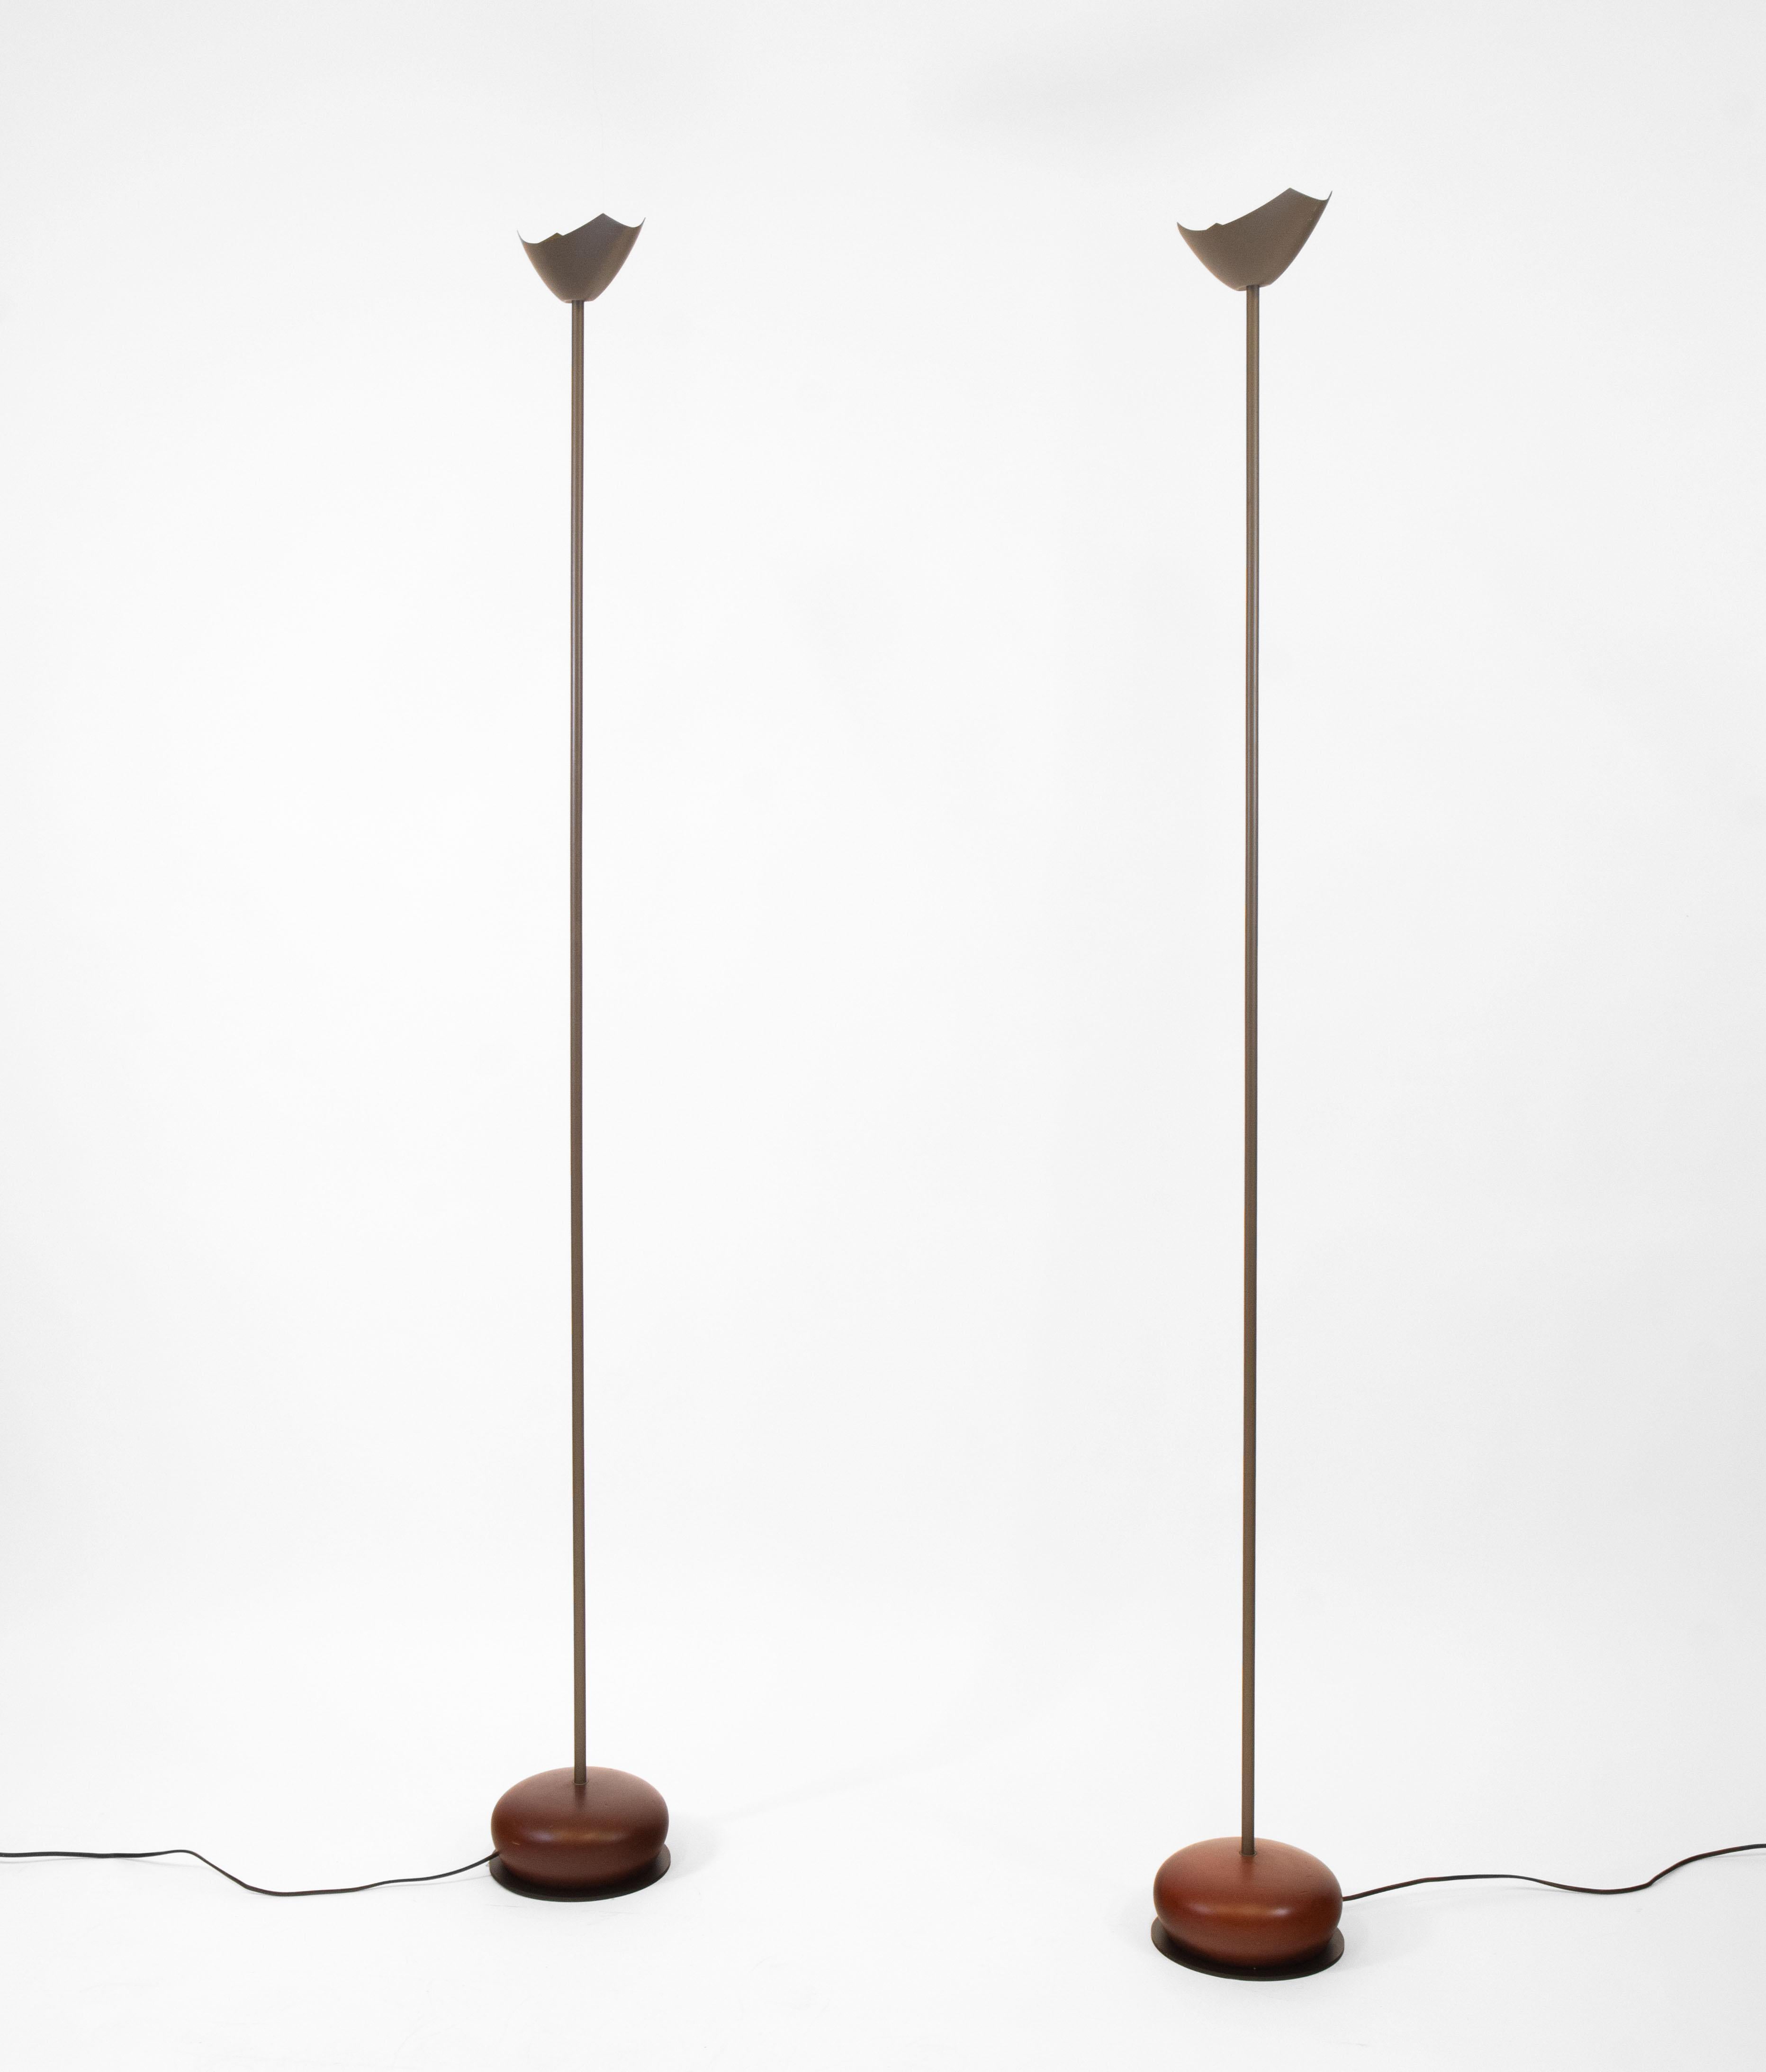 Pair Vintage Uplighter Floor Lamps By Josep Llusca 'Servul F' For Flos Italy  For Sale 2